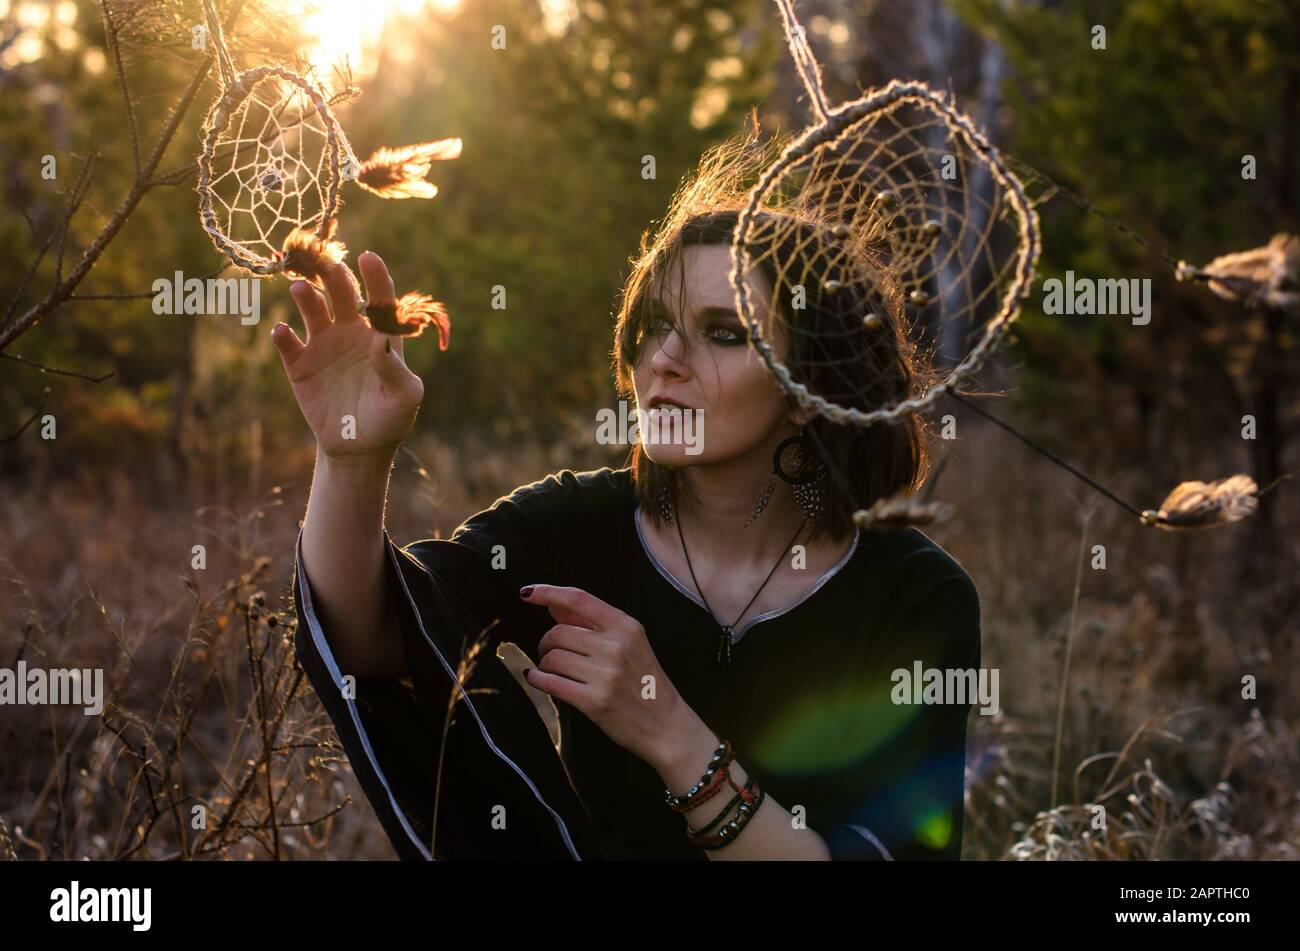 Boho woman with short windy hair. Female silhouette with dream catcher through the sun rays Stock Photo